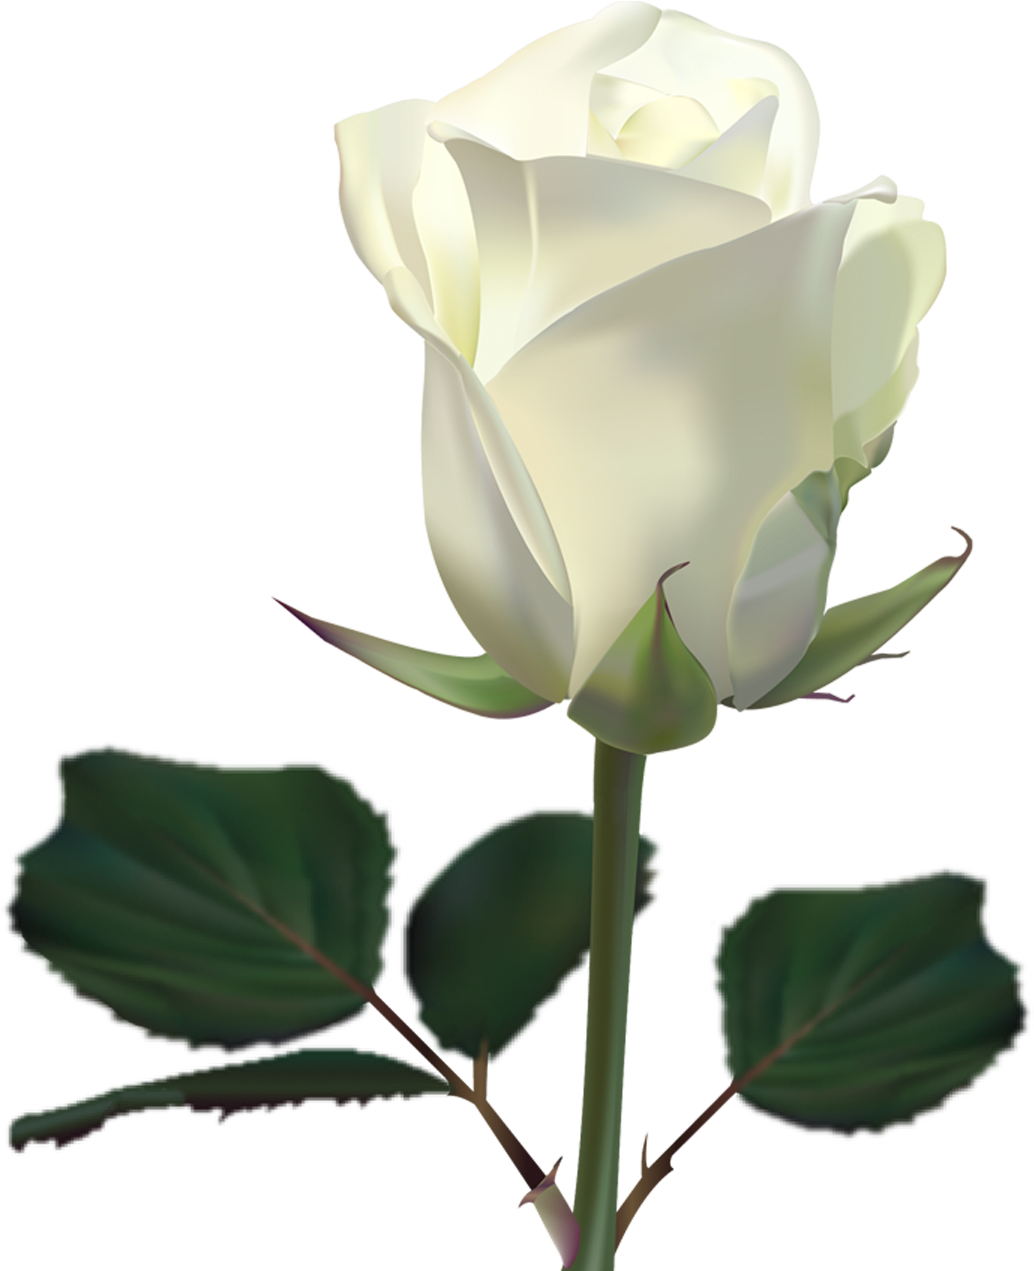 White Rose Wallpaper By Lilianneret - White Roses Wallpaper Png (2300x1400)